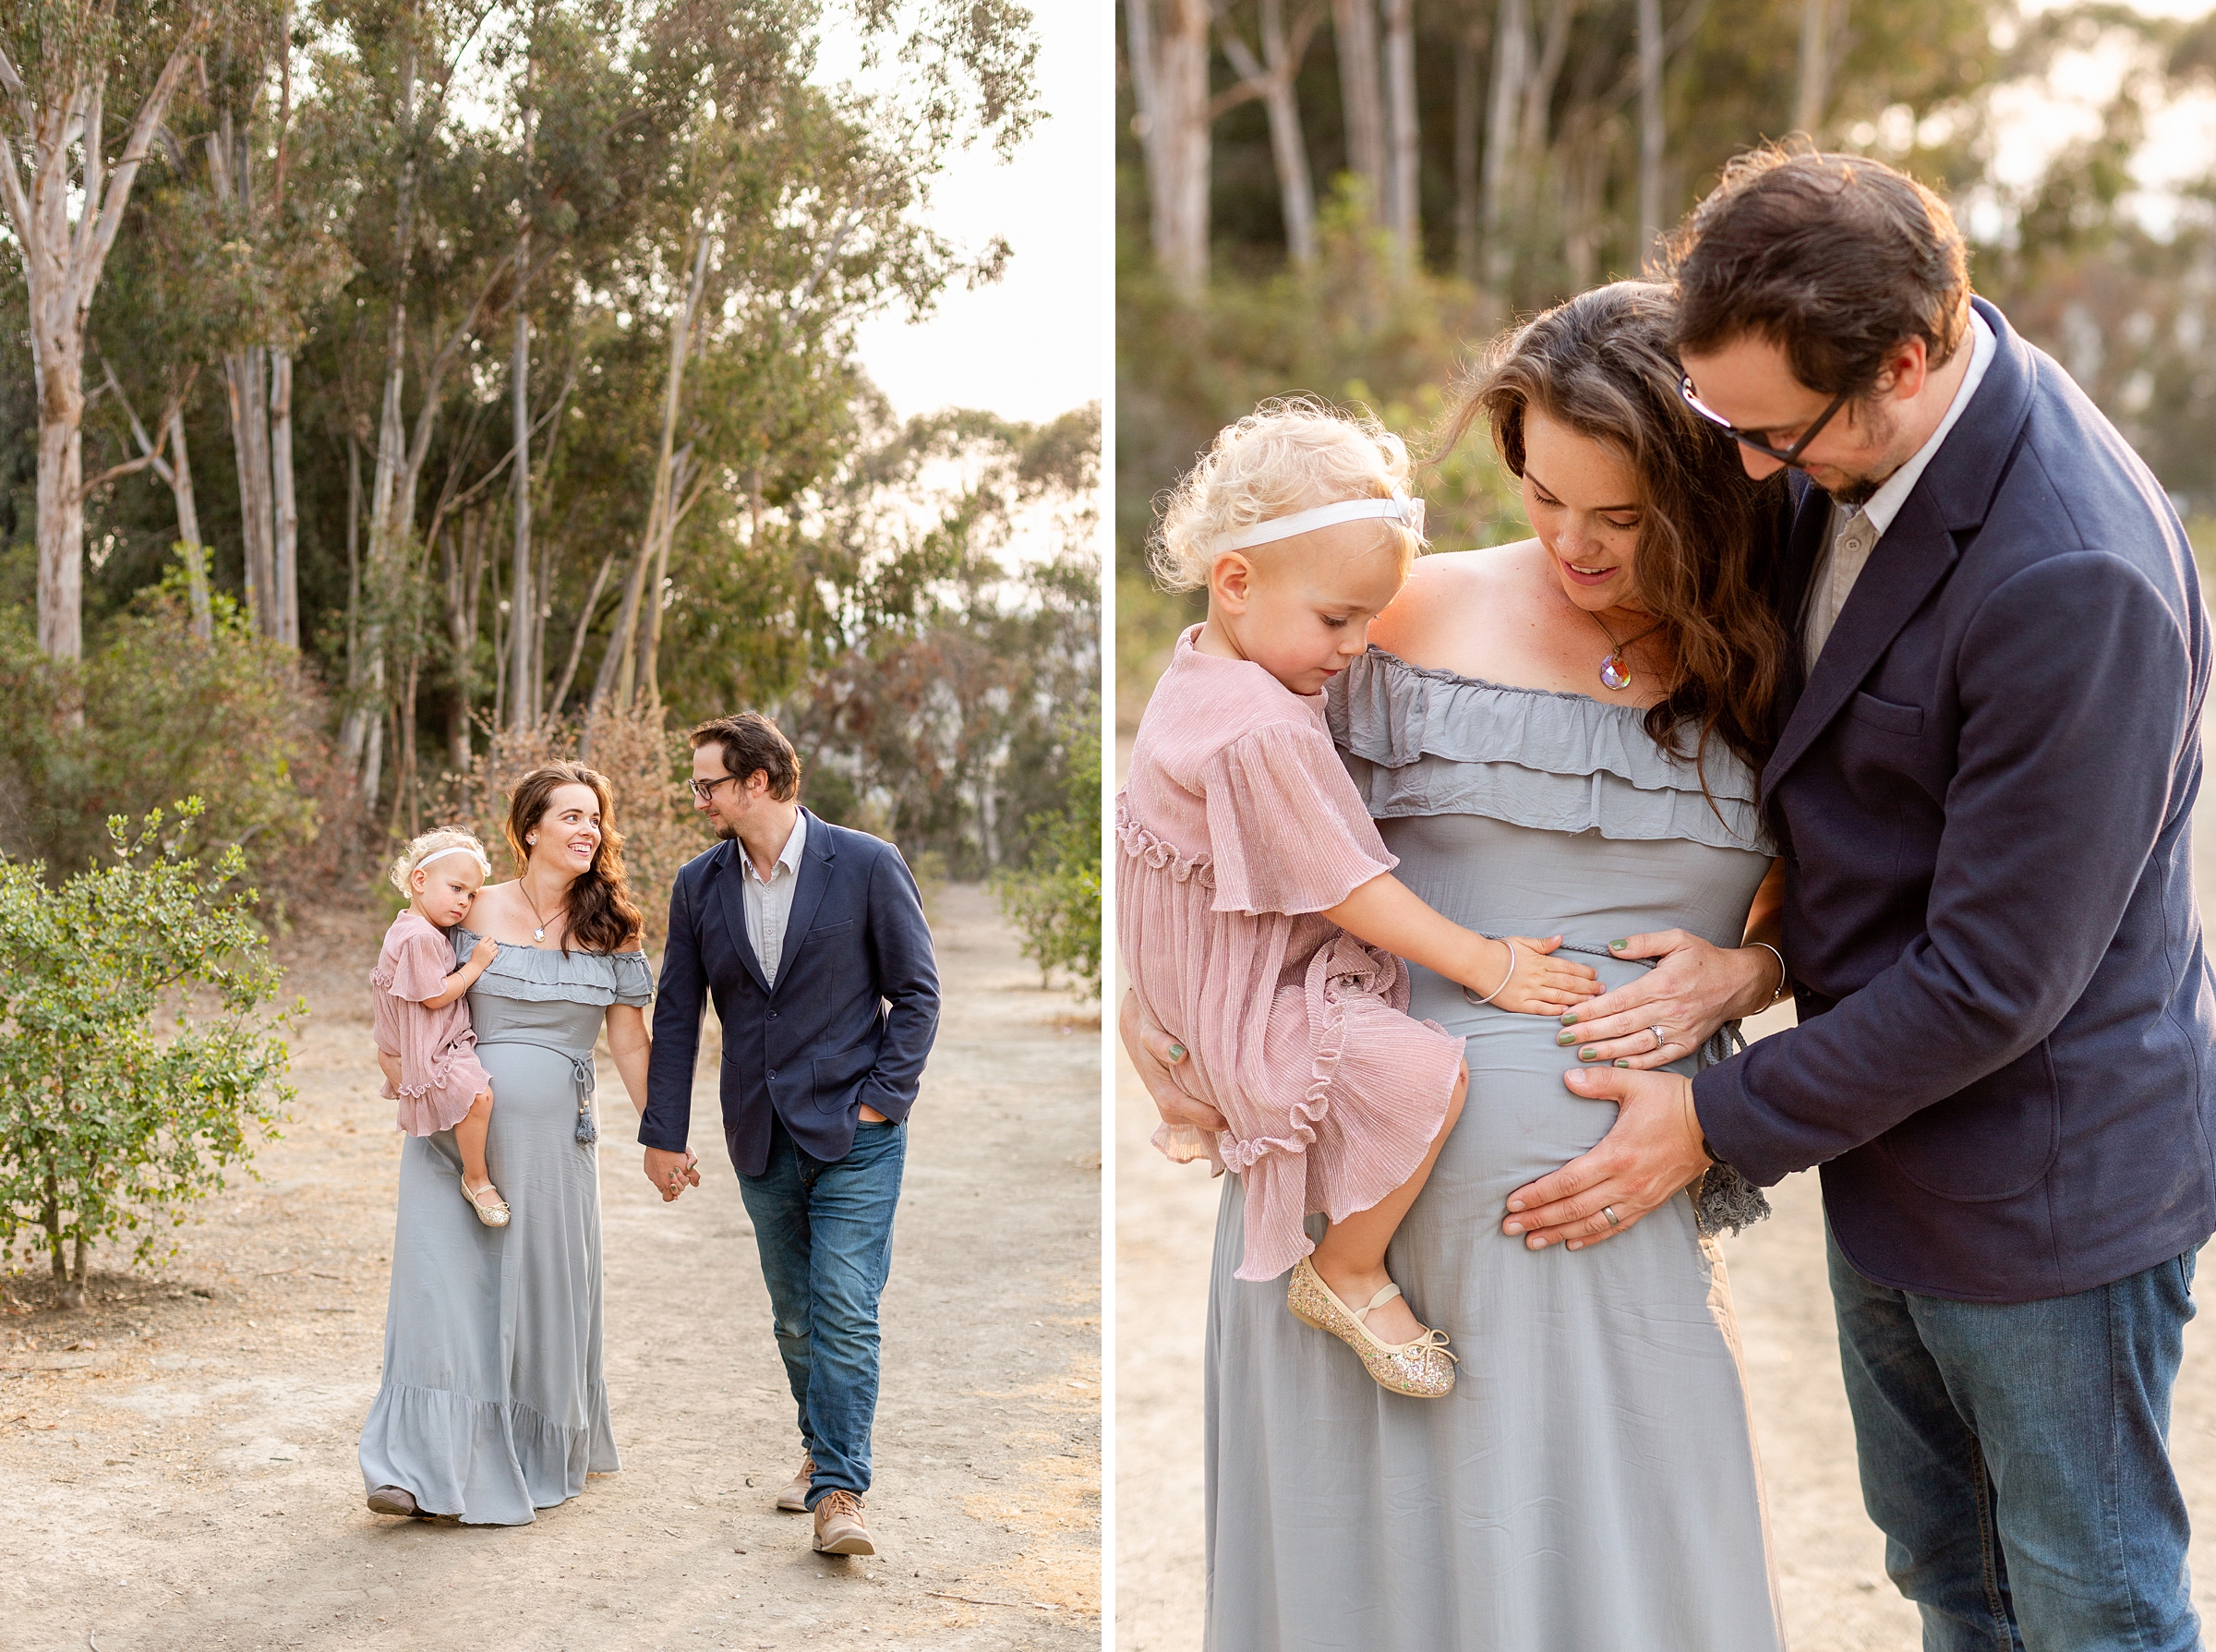 dreamy outdoor maternity photography in Los Angeles